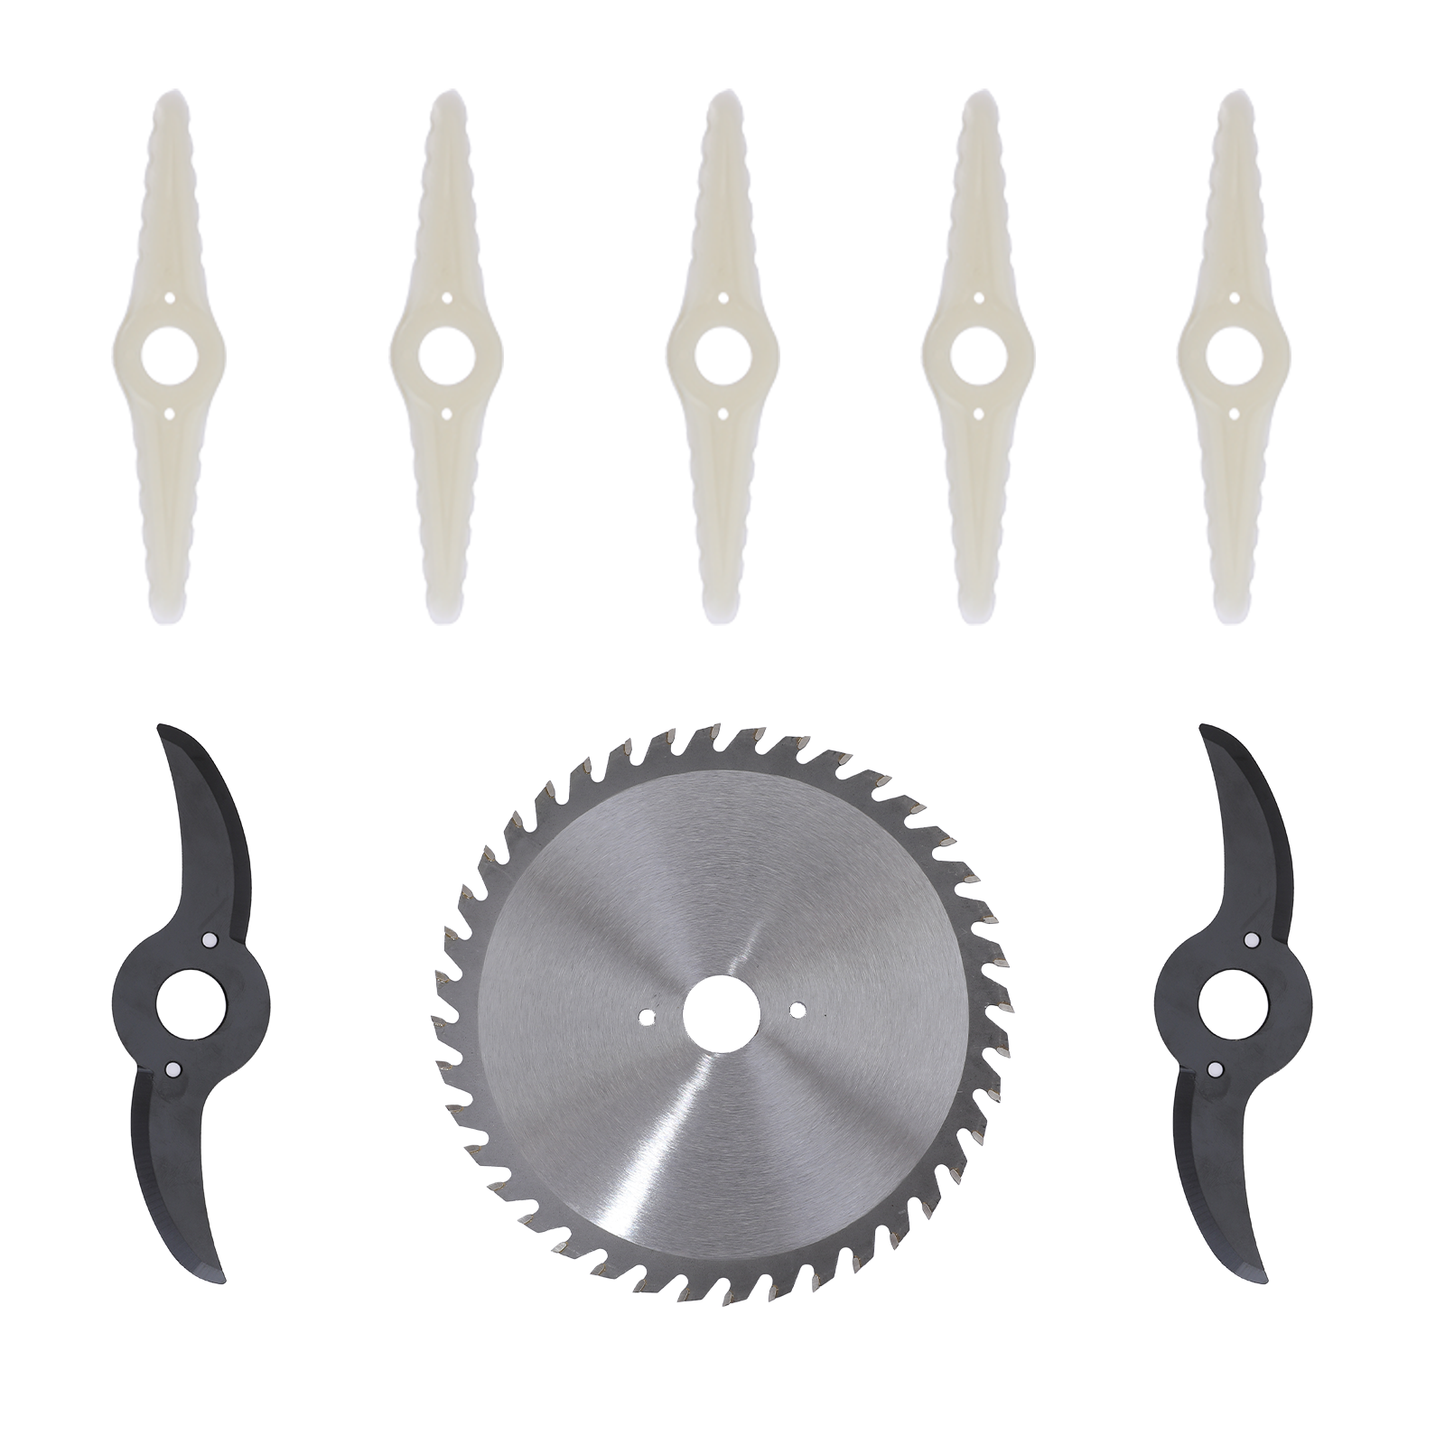 PATIOX Weed Wacker Replacement Blades